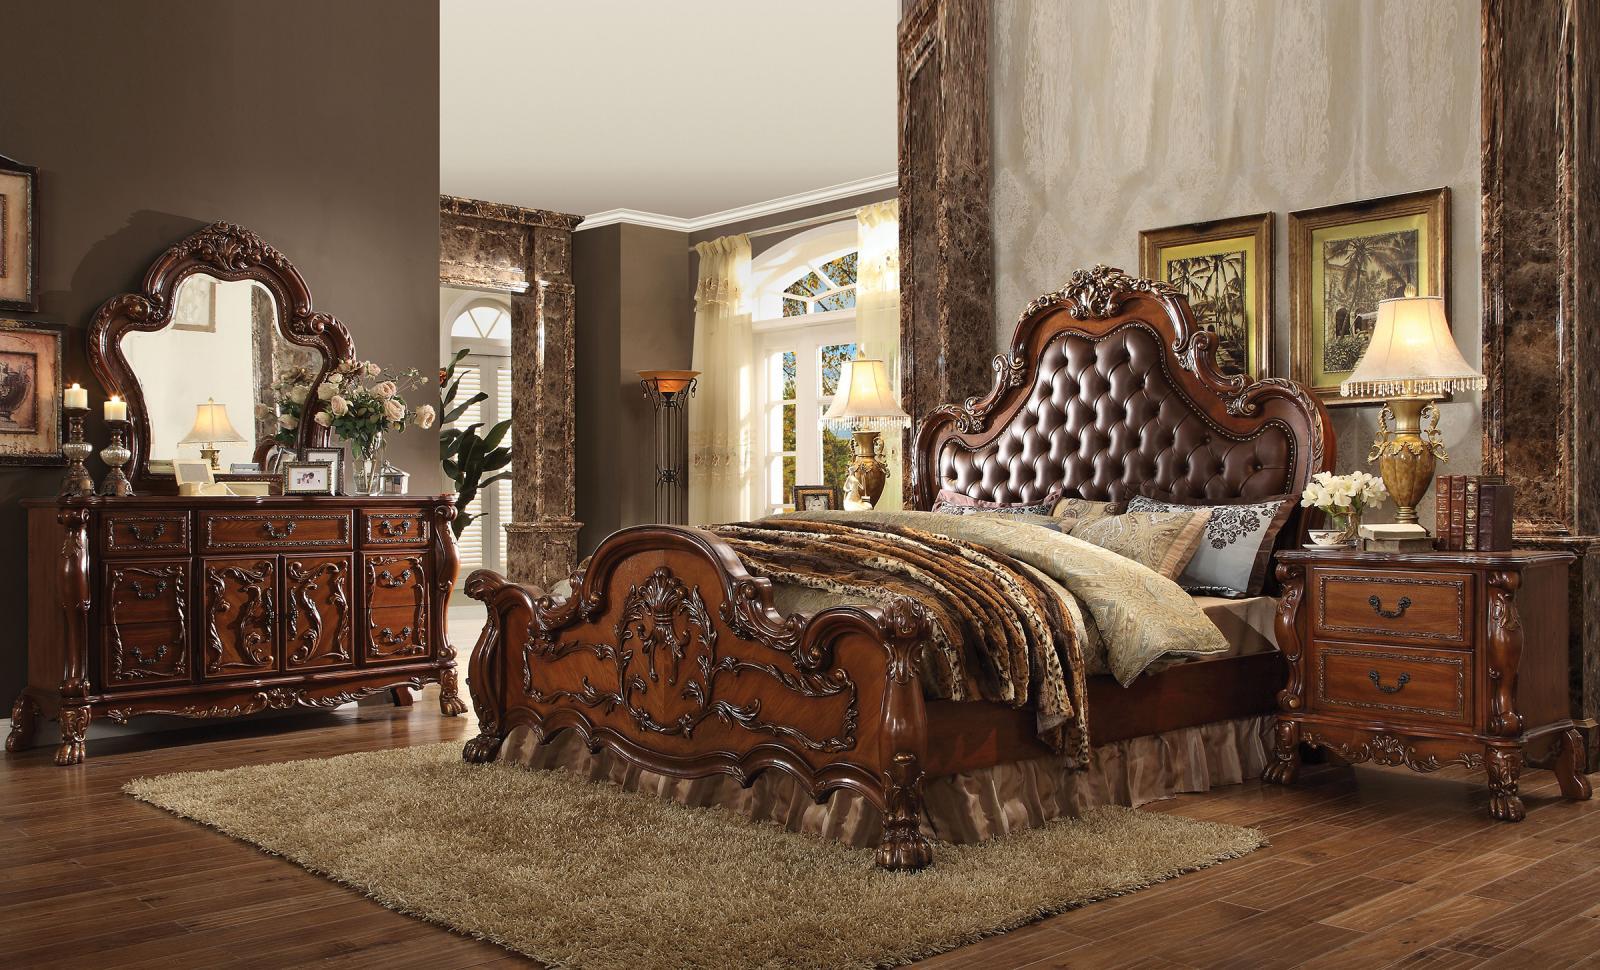 

    
Luxury Tufted PU Cherry Oak Perales Queen Bedroom Set 5 Traditional Carved Wood
